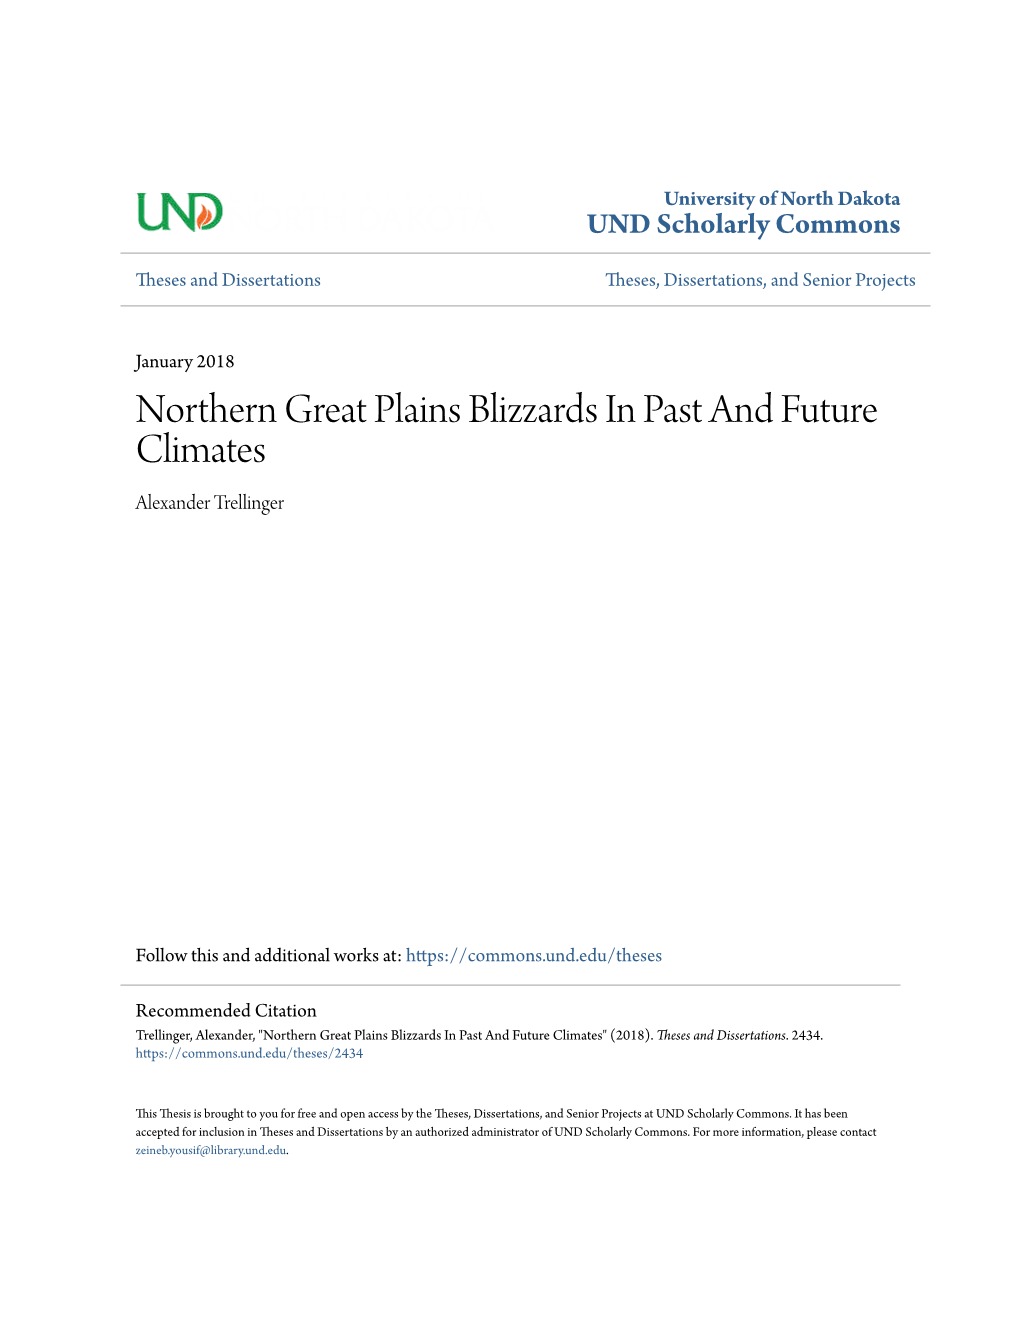 Northern Great Plains Blizzards in Past and Future Climates Alexander Trellinger